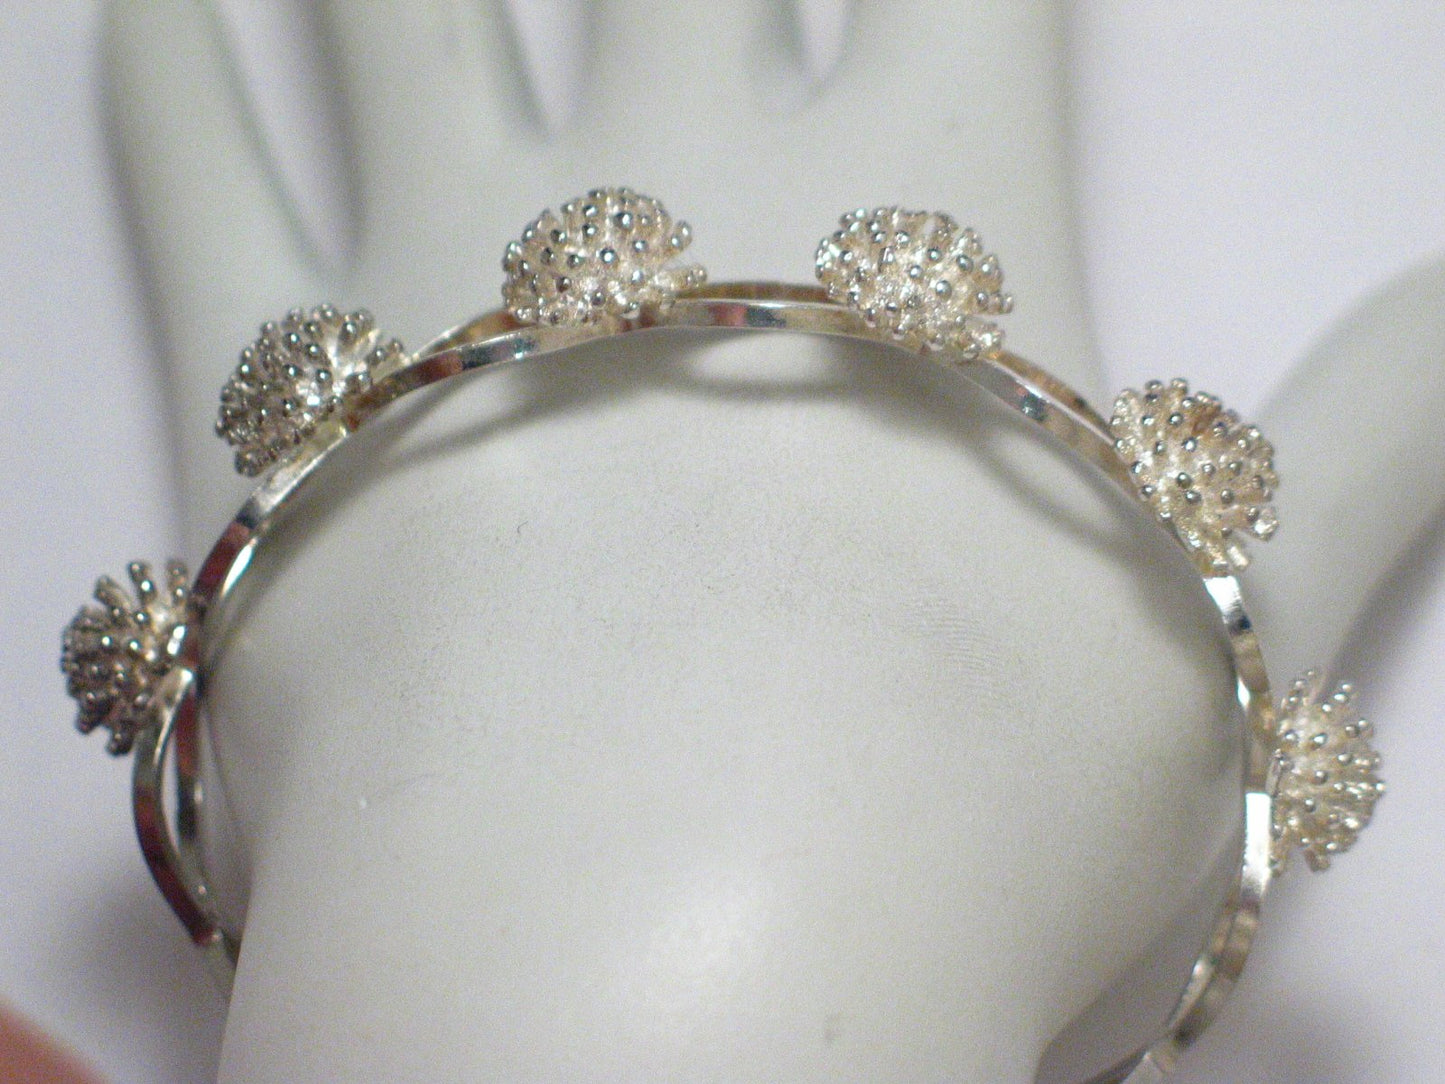 Porcupine Ball Cuff Bracelet Silver Plated Costume Jewelry - Blingschlingers Jewelry